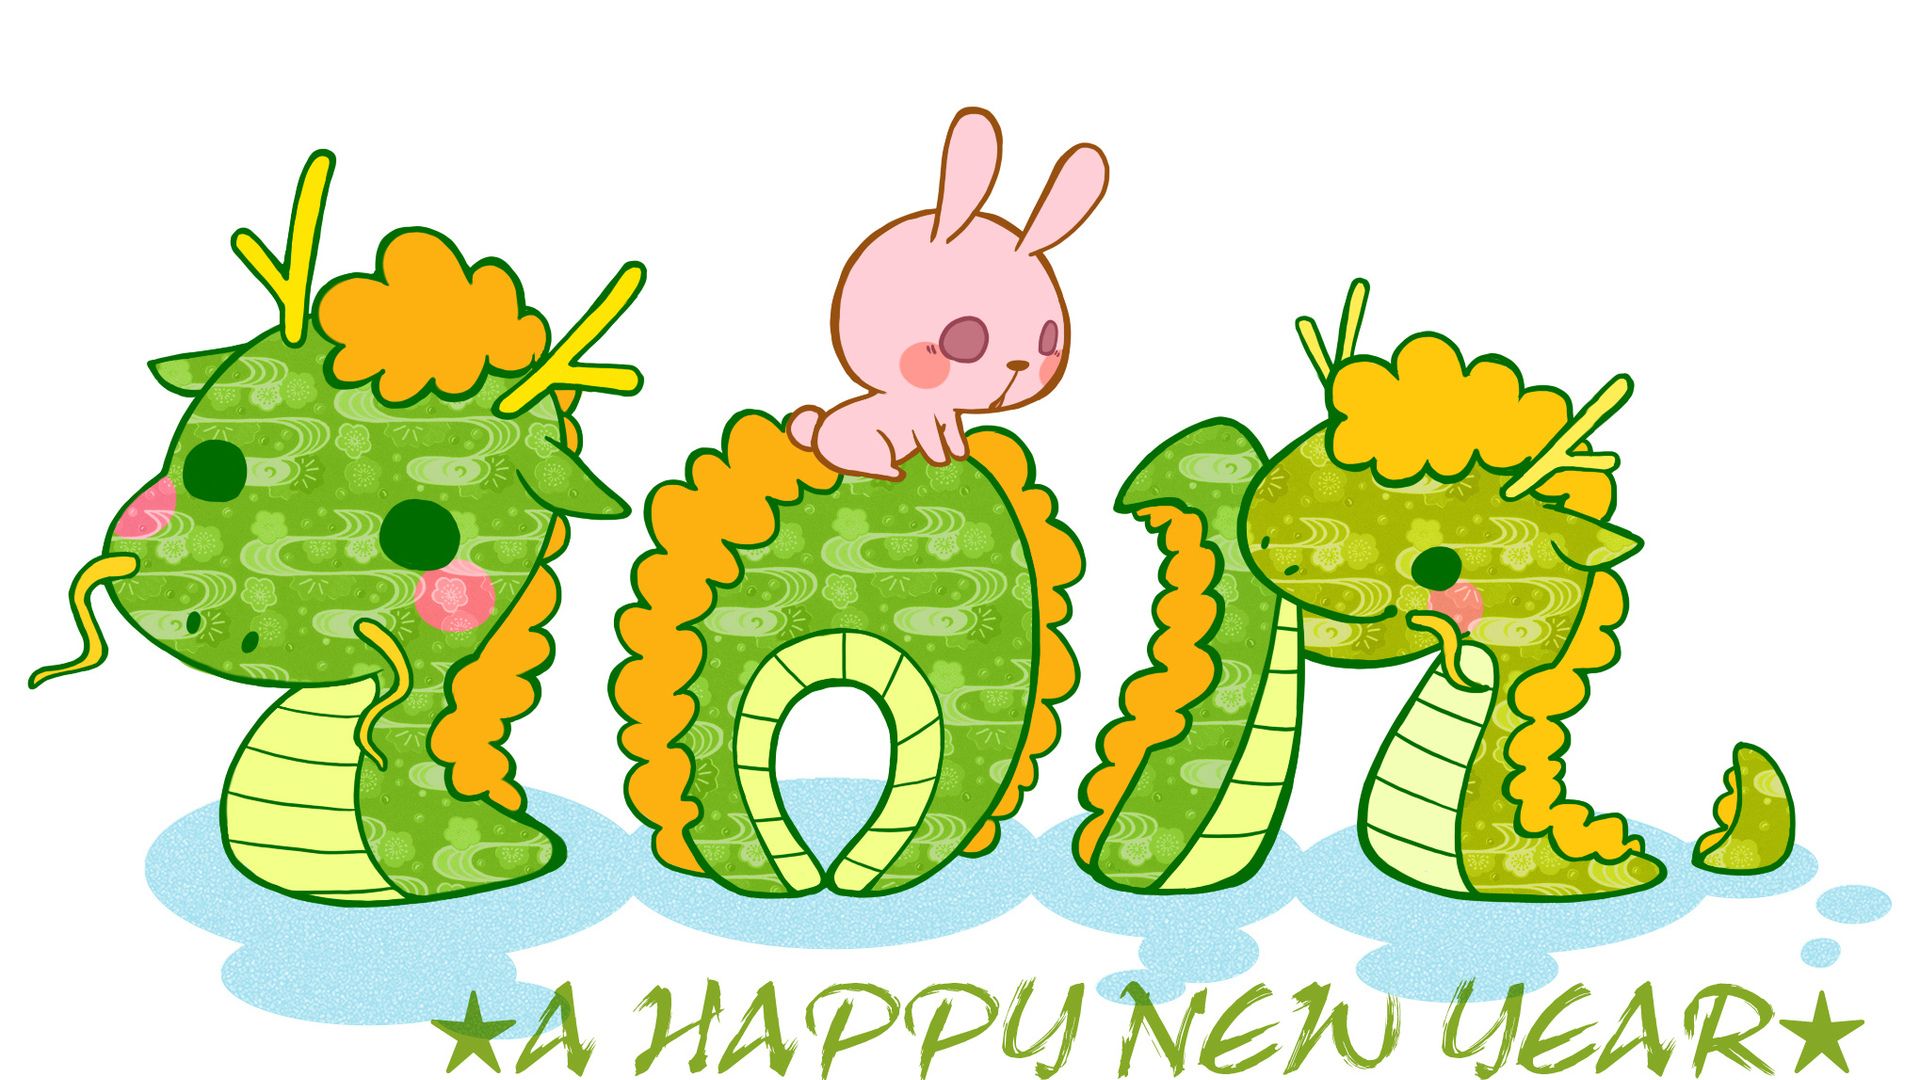 Three cute dragons and a bunny sitting on the numbers 2011. - Dragon